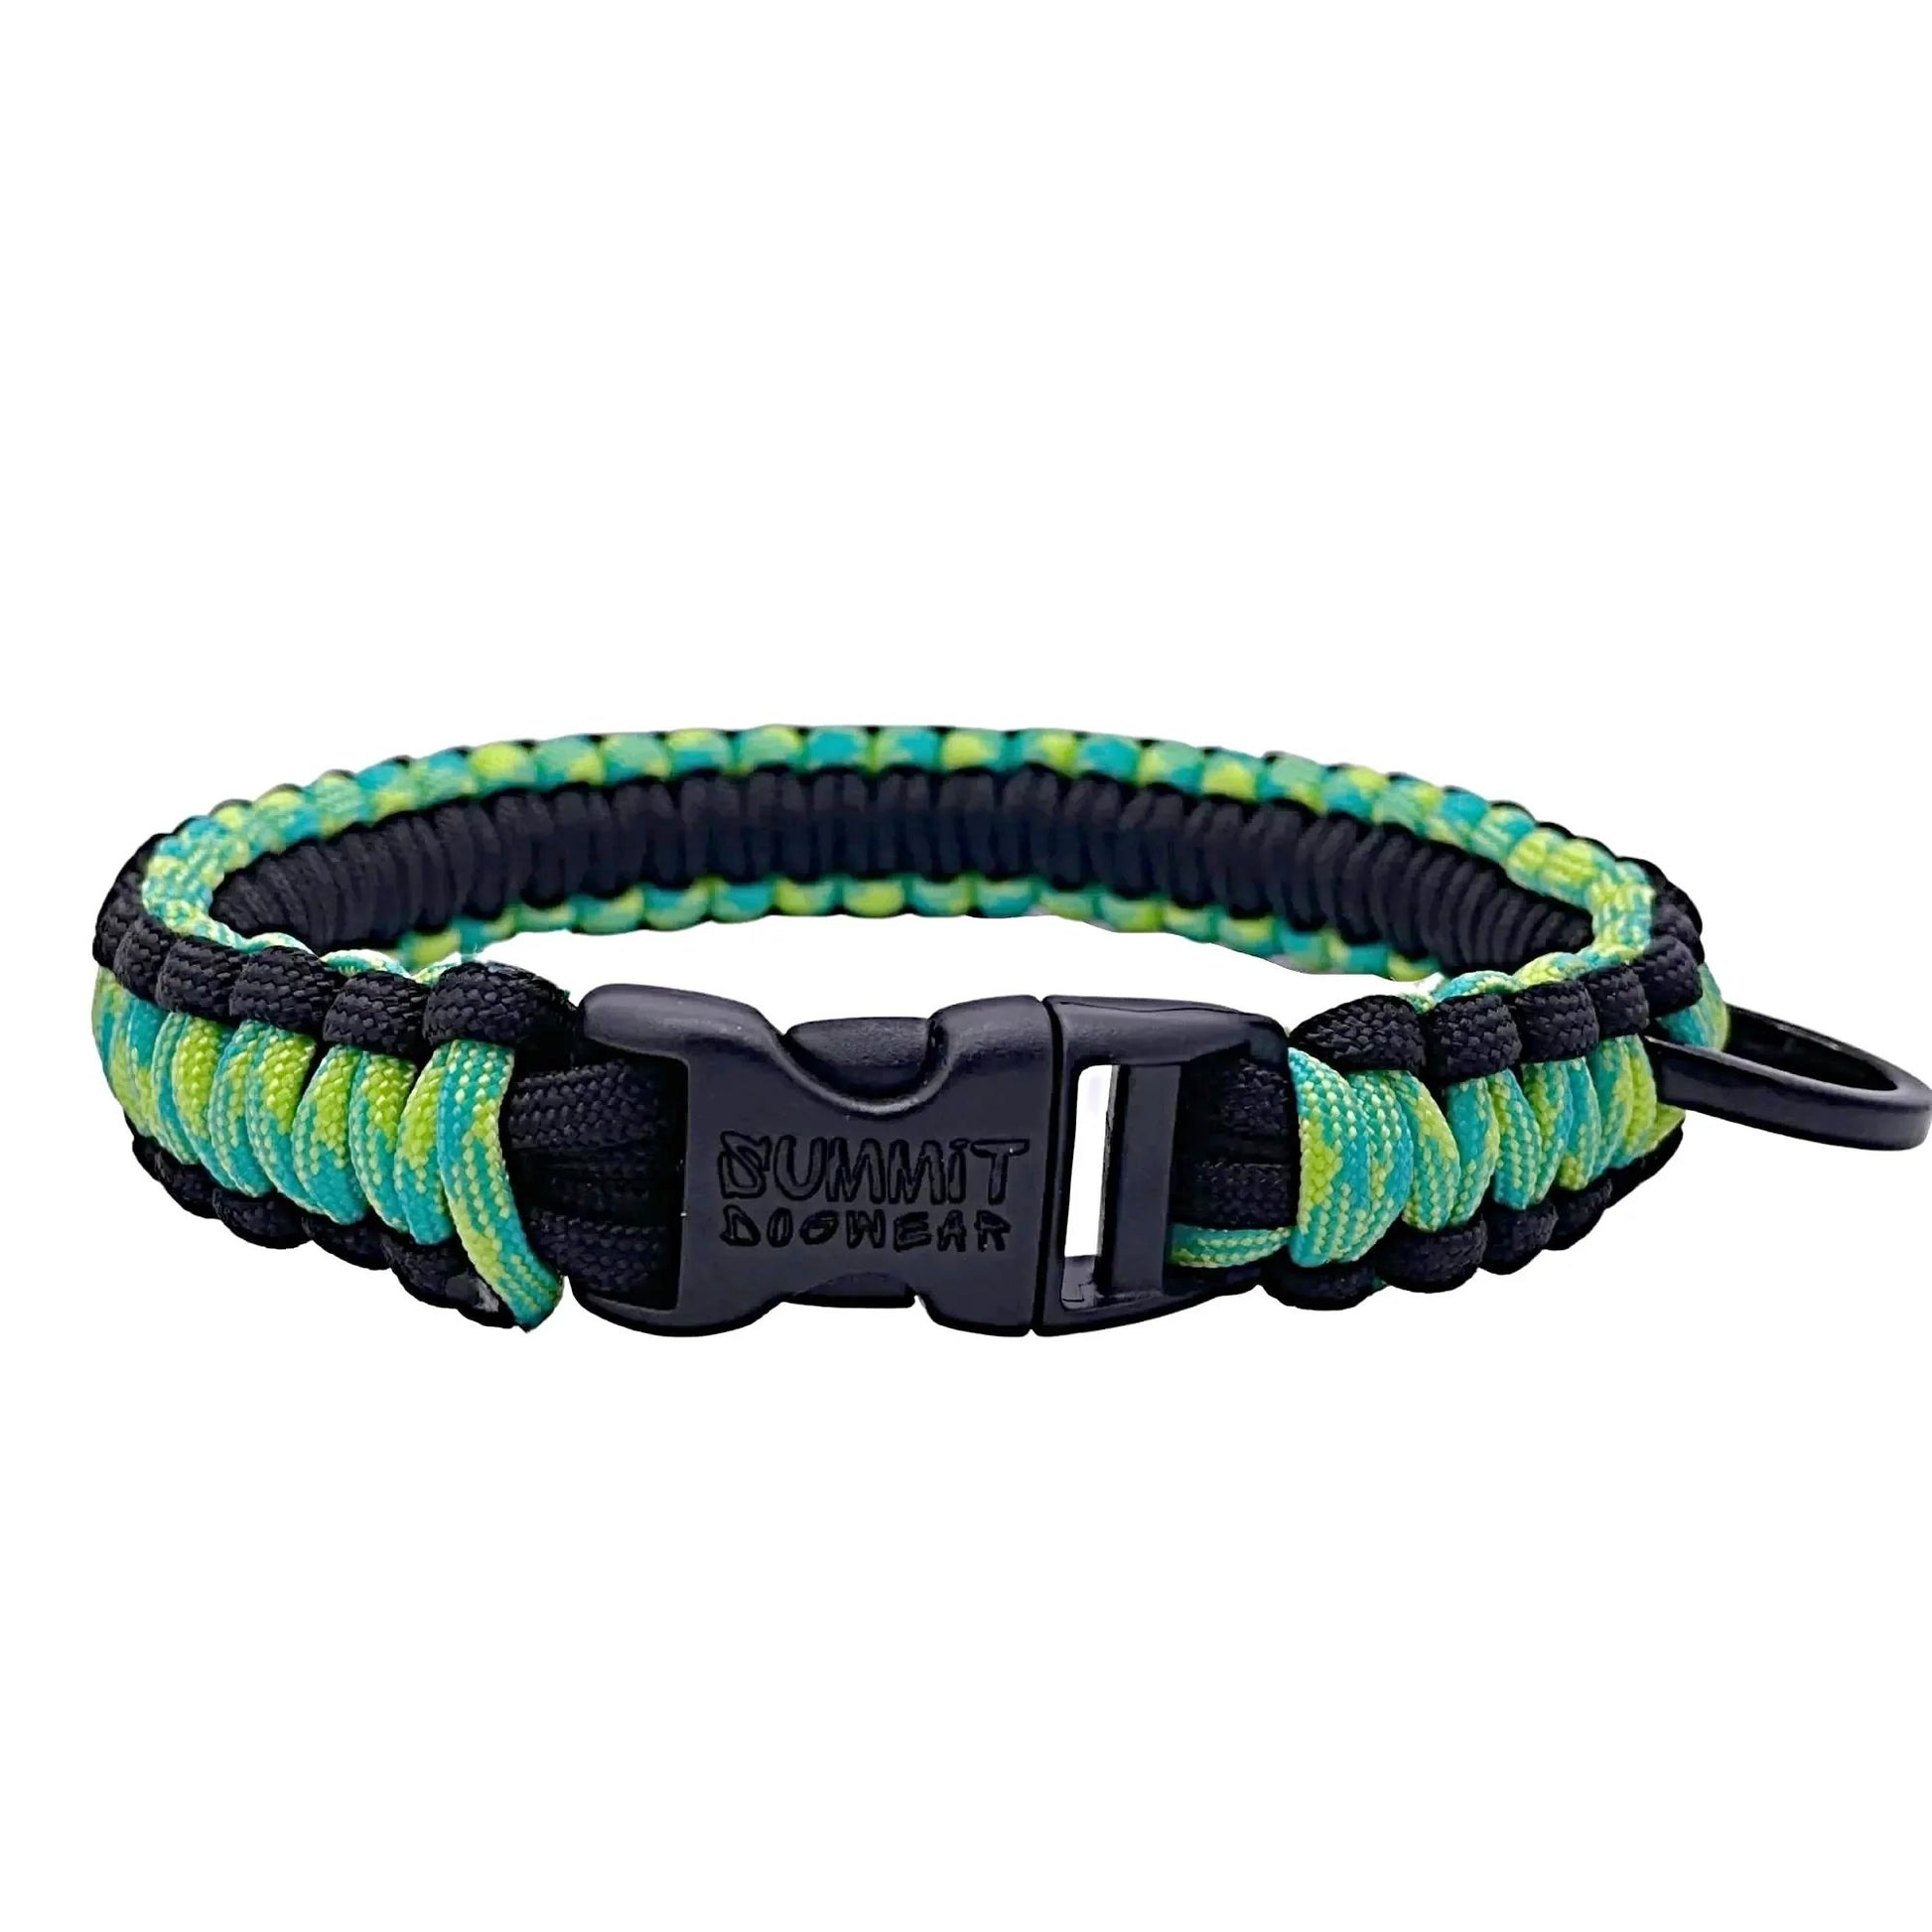 Small paracord dog collar in bright high visability yellow